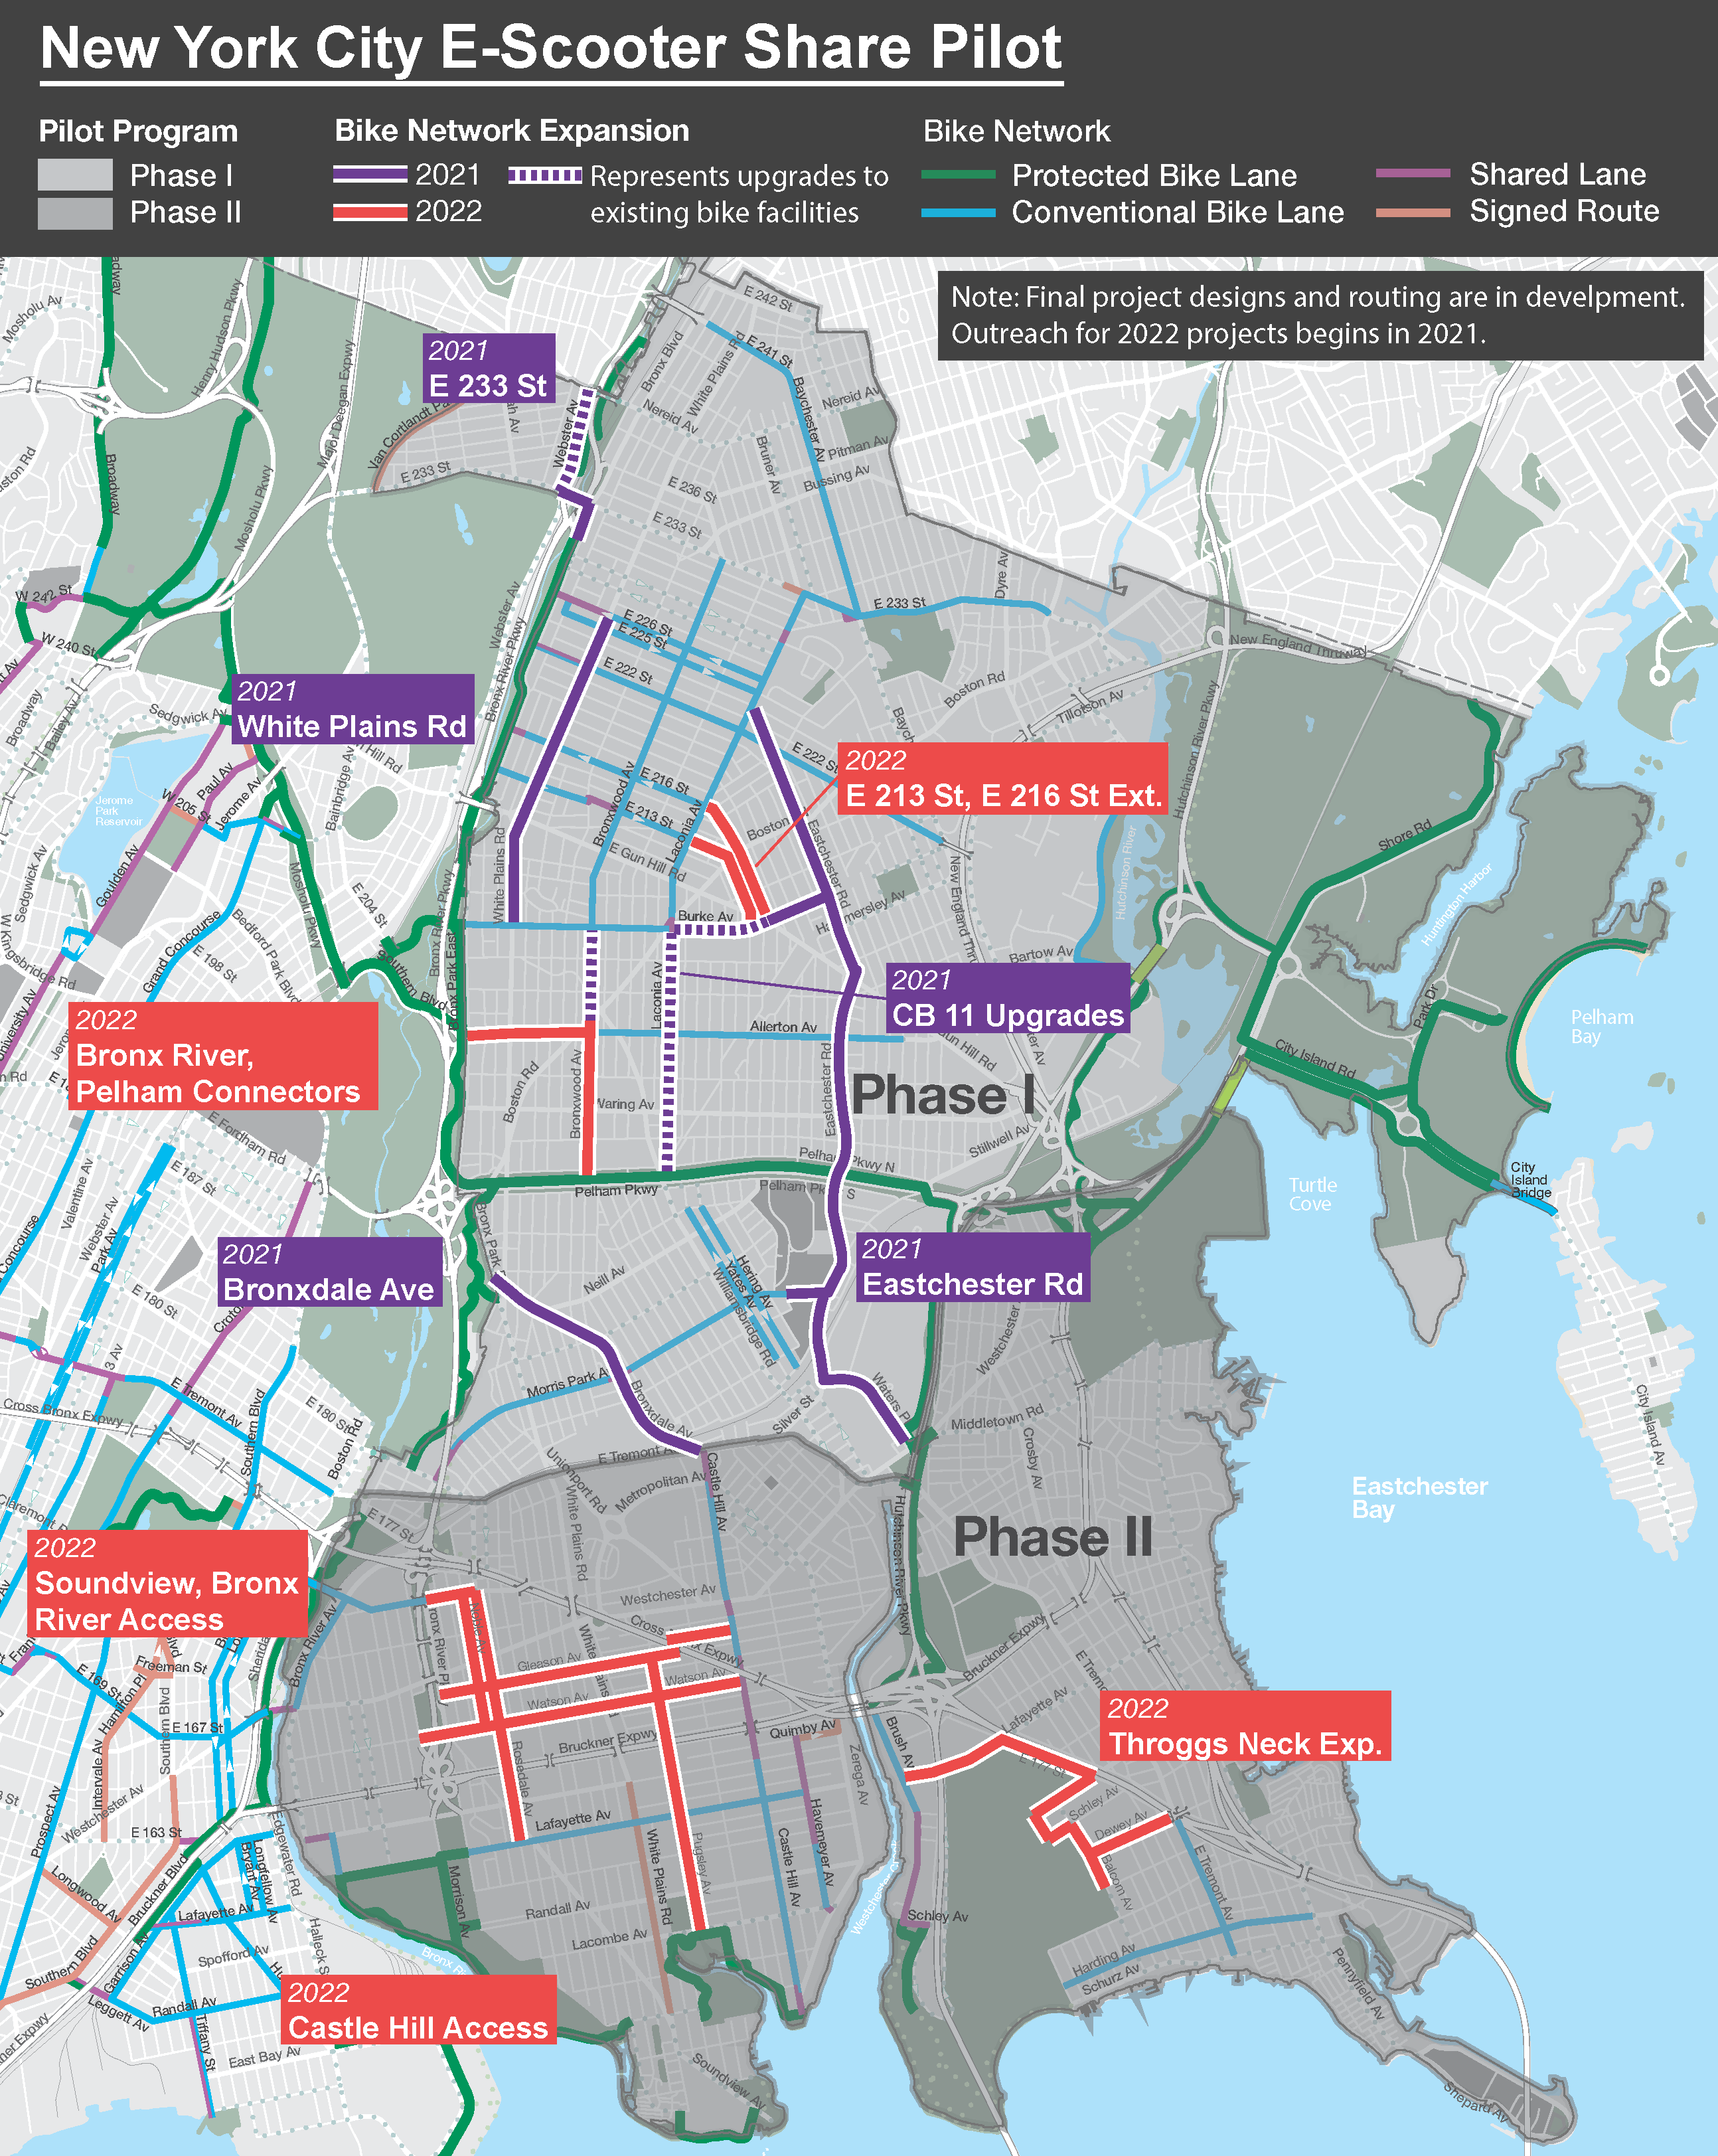 A map of the e-scooter pilot area, covering Bronx Community 9, 10, 11, and 12.